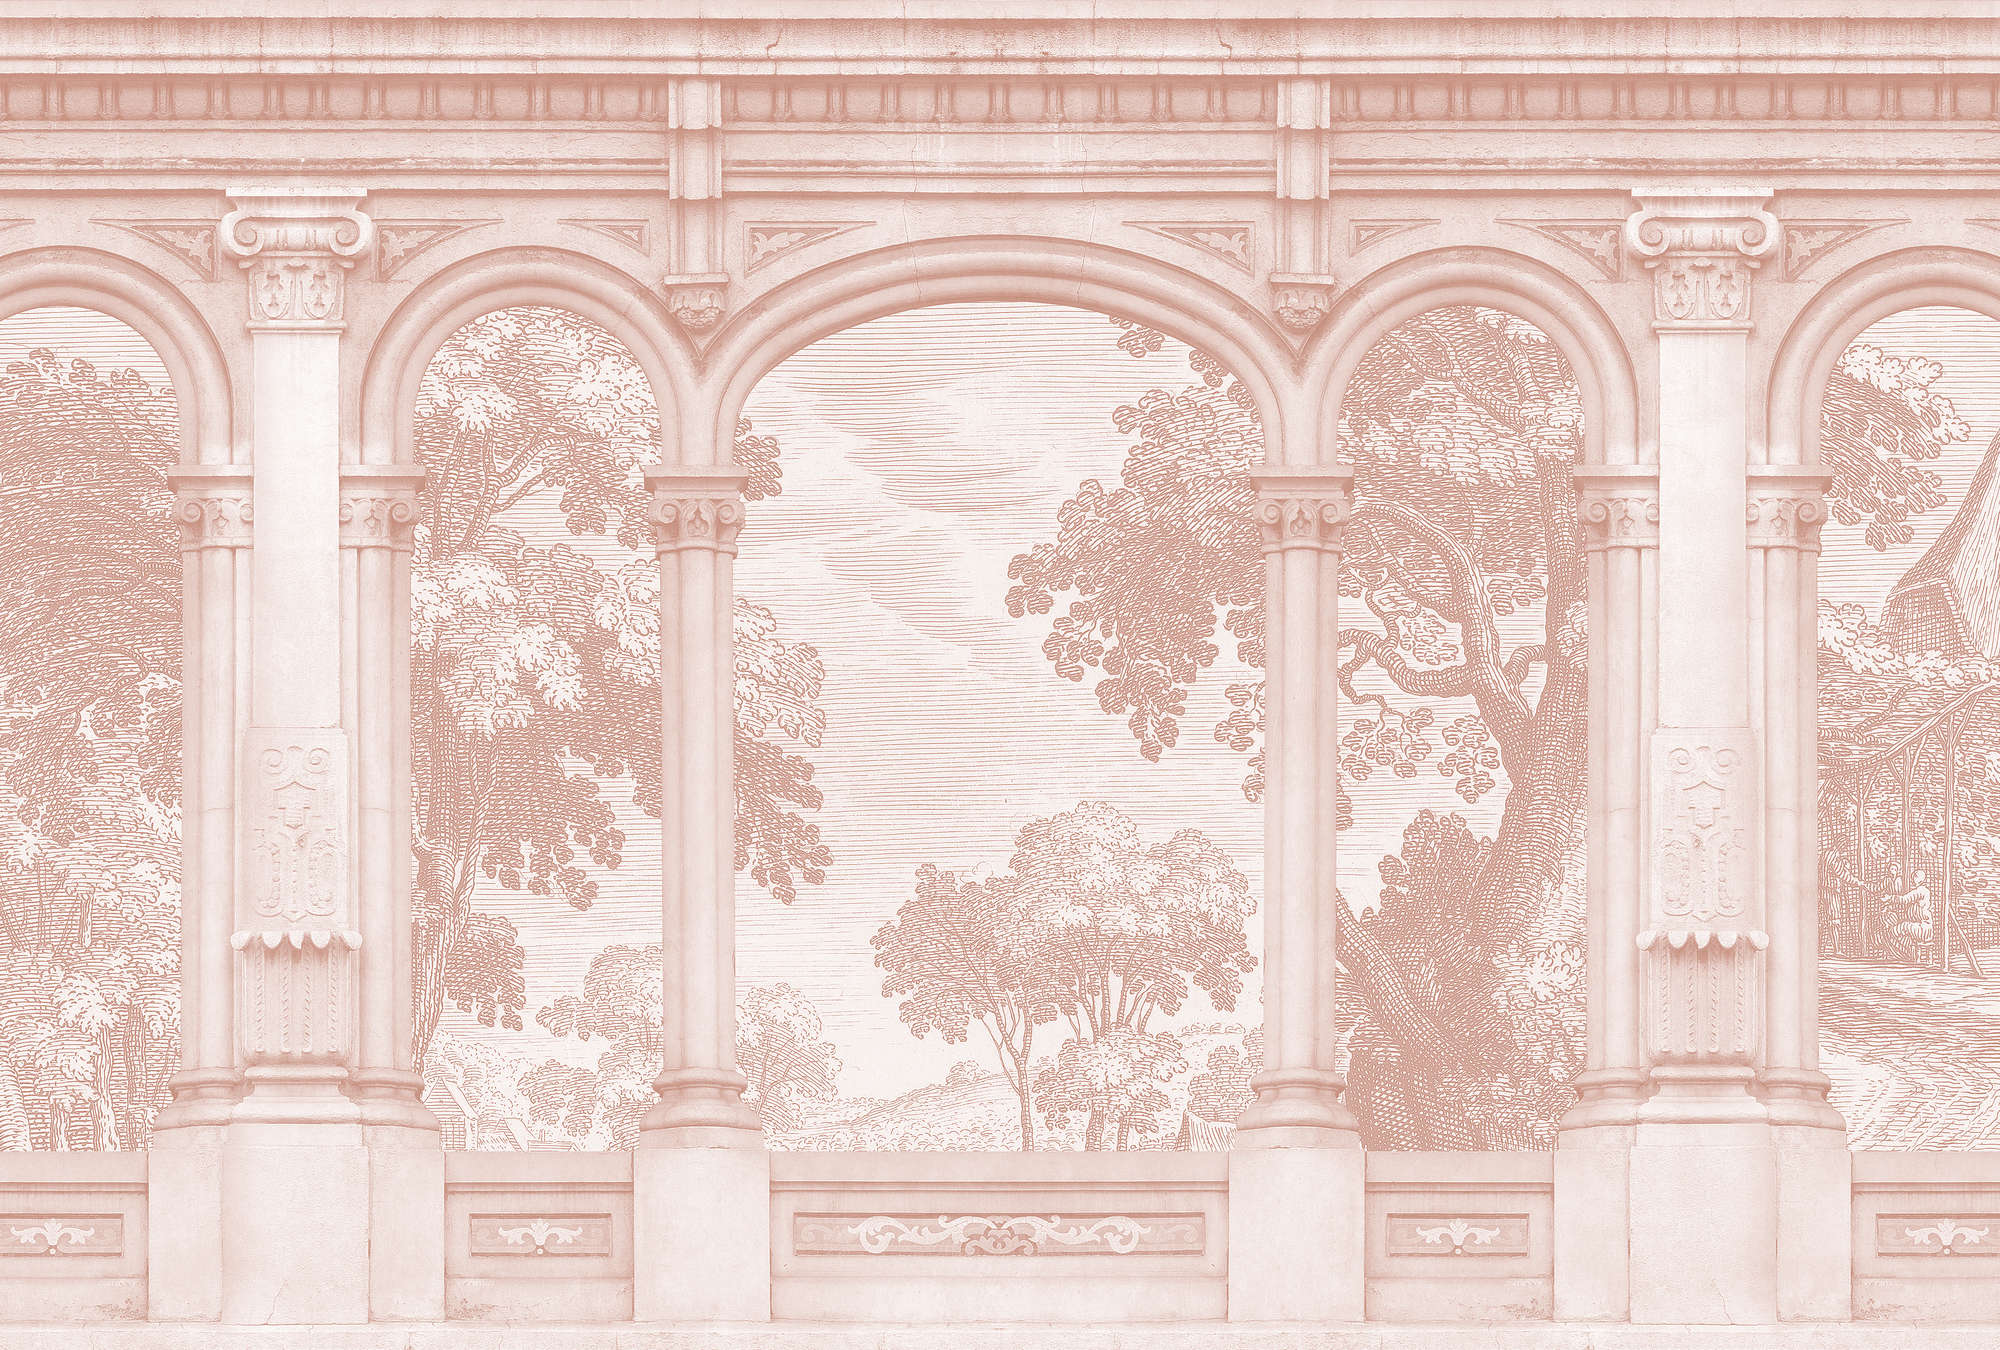             Roma 3 - pink mural Historic Design with round arch window
        